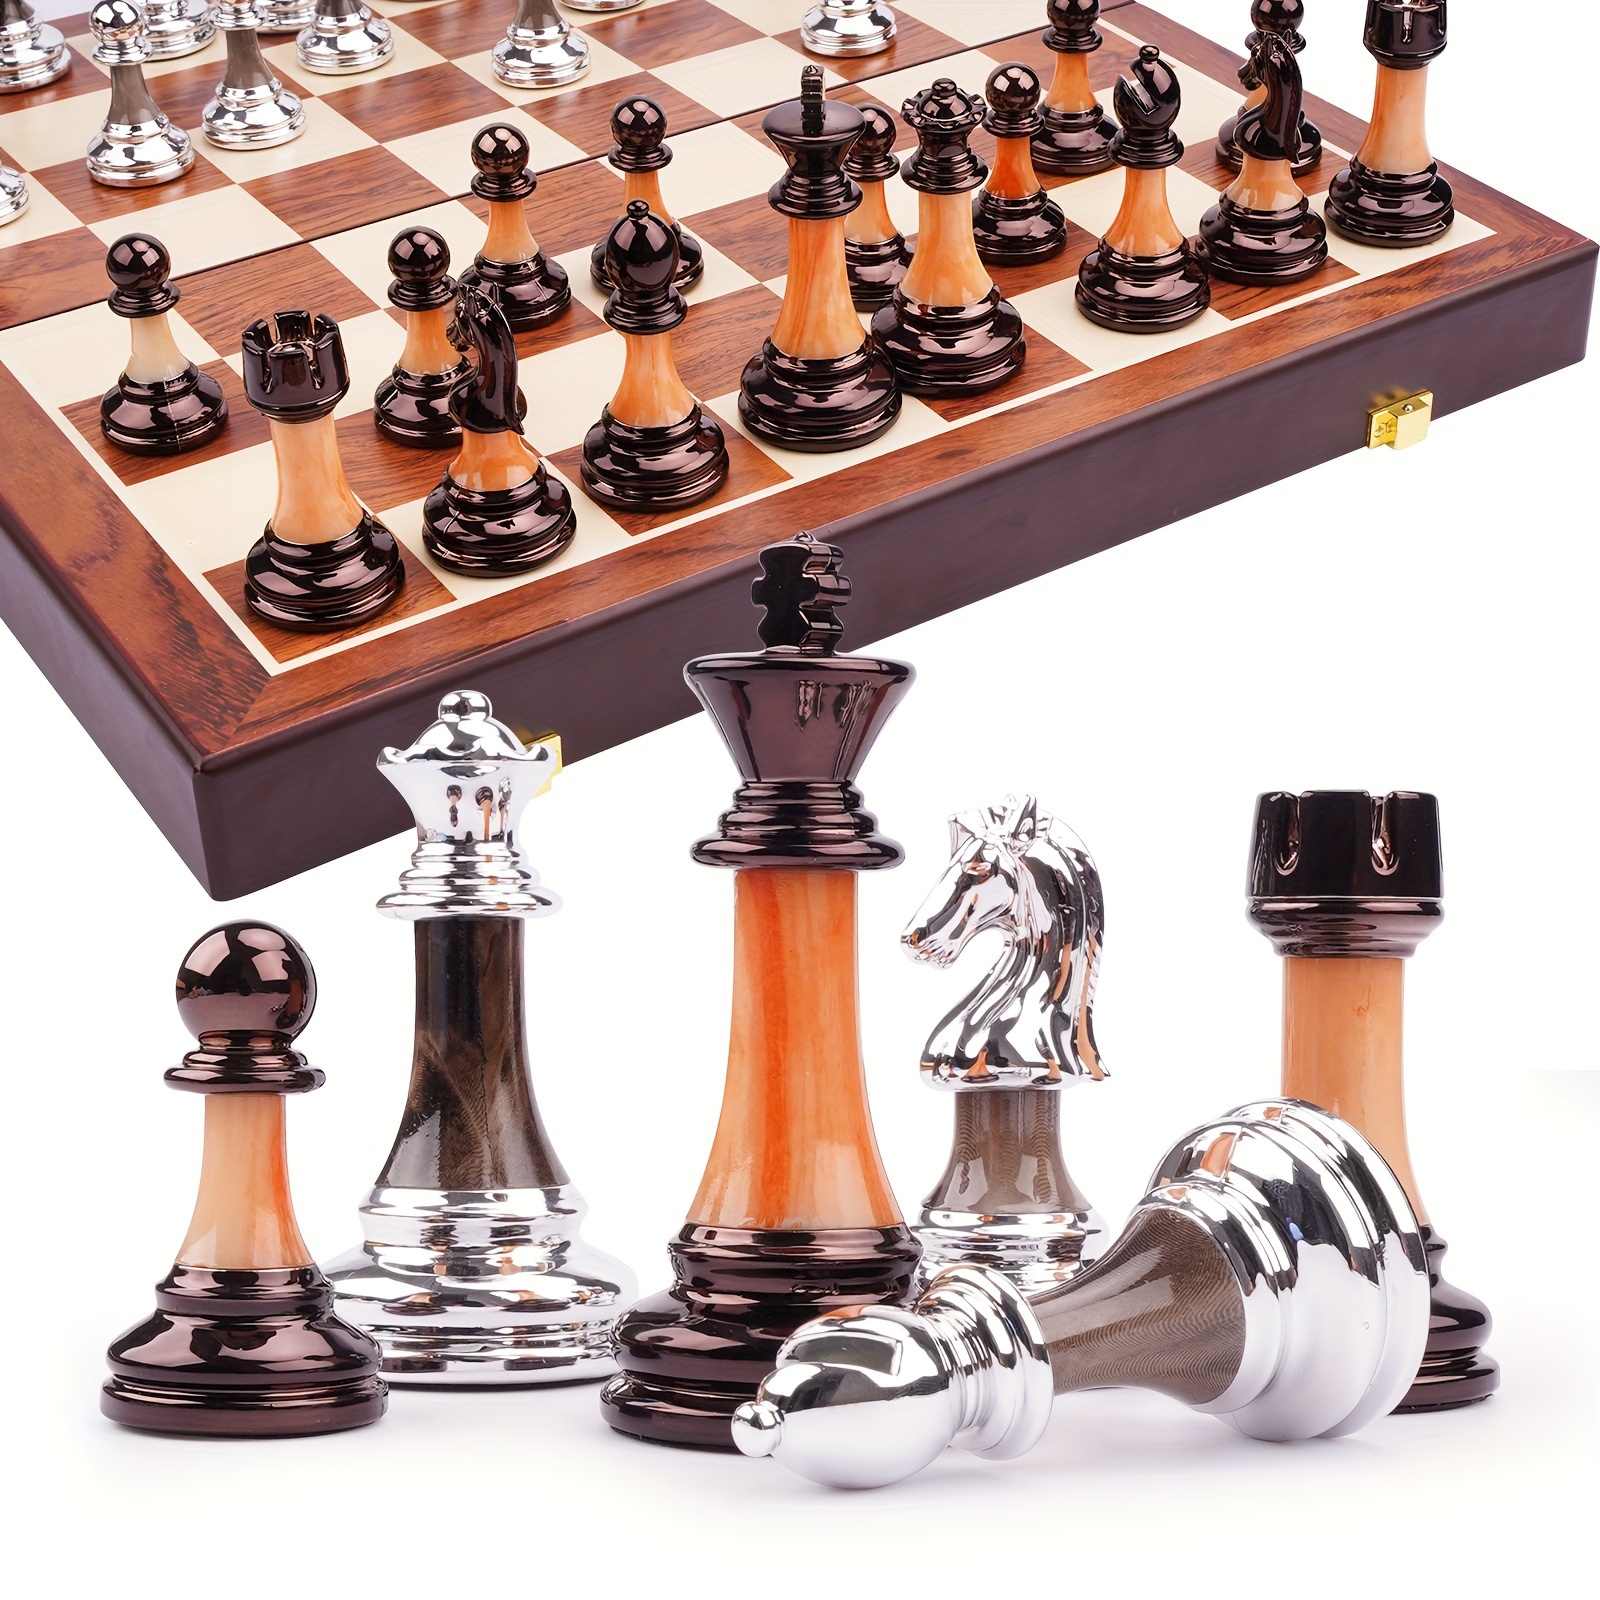 

Large Chess Set Folding Wooden Board With Deluxe Weighted Acrylic Chess Pieces - 3.5" King With Storage Slots For Adults House Warming Retirement Gift